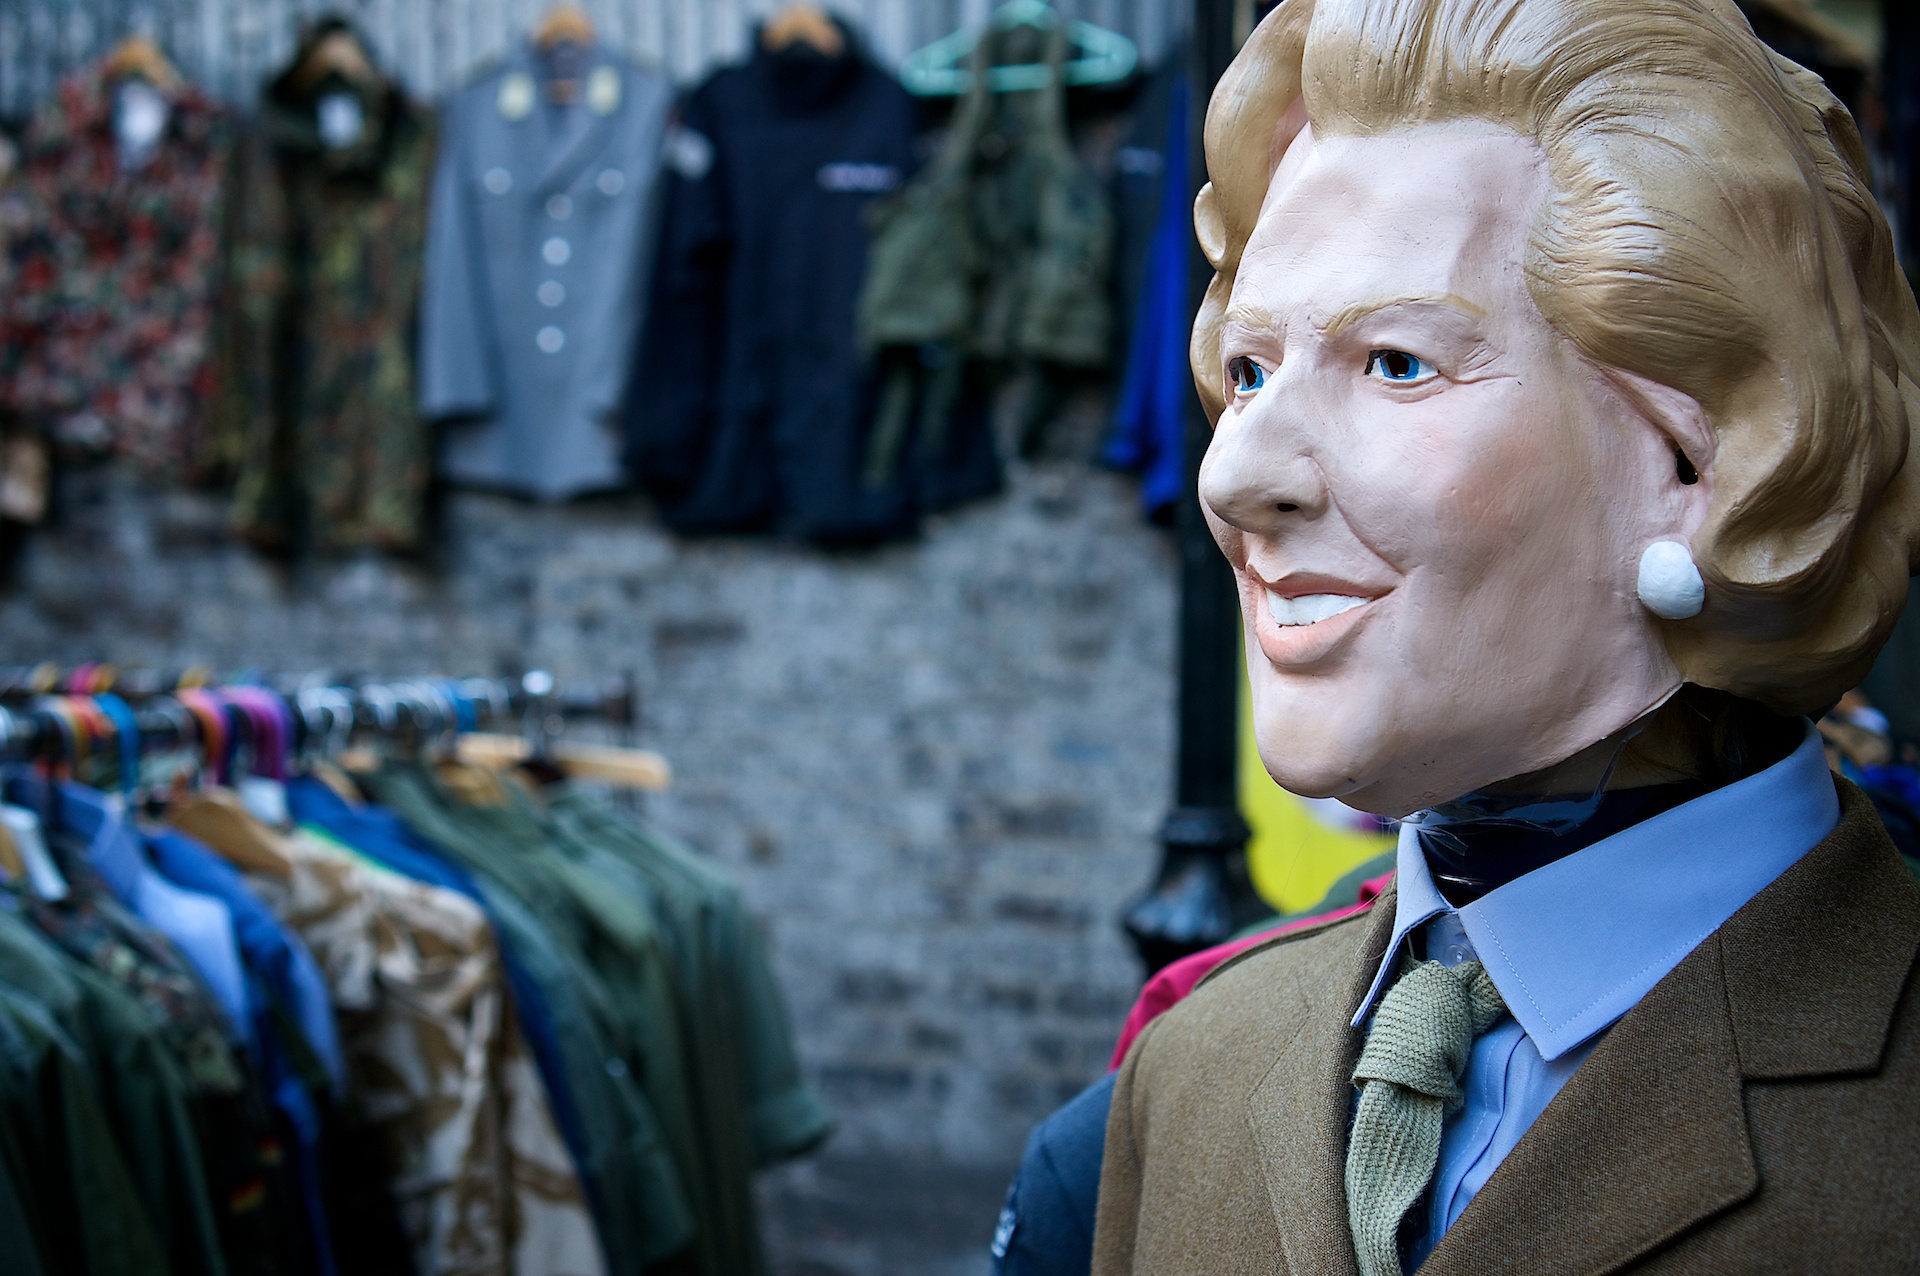 the head and collar of a dummy is next to several jackets